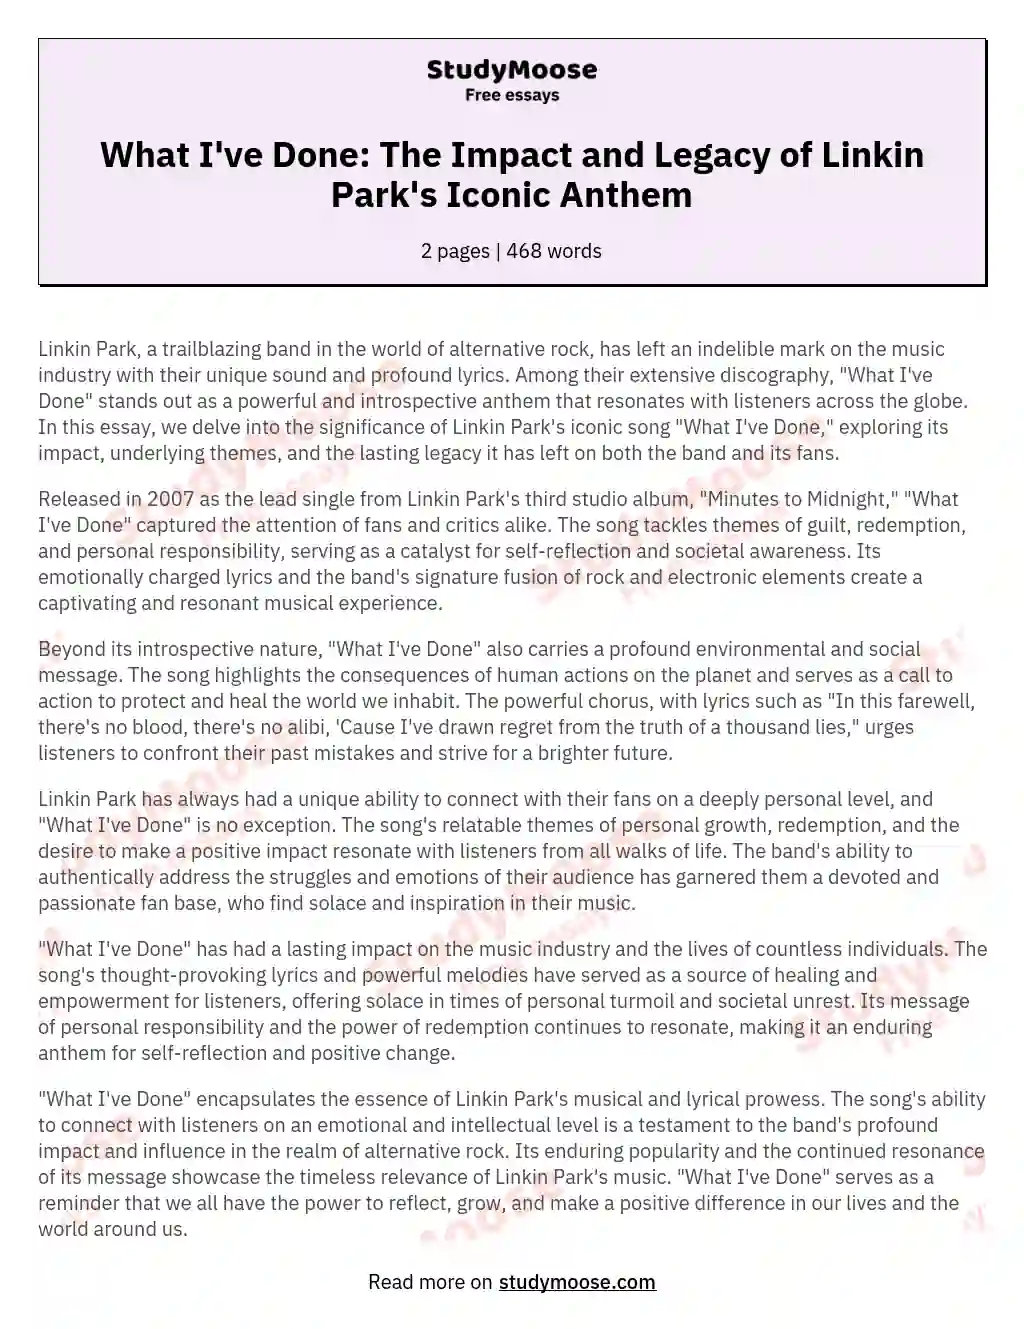 What I've Done: The Impact and Legacy of Linkin Park's Iconic Anthem essay